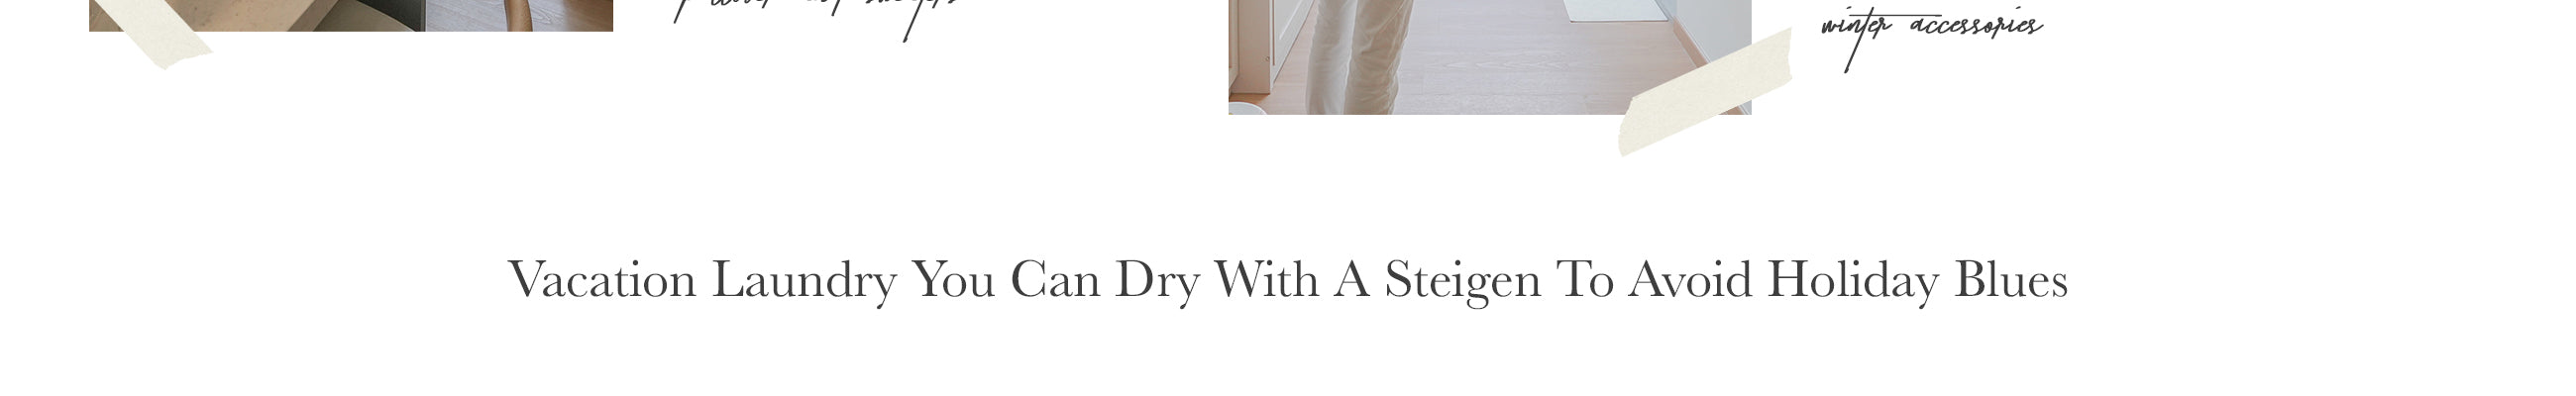 Vacation Laundry You Can Dry With A Steigen To Avoid Holiday Blues